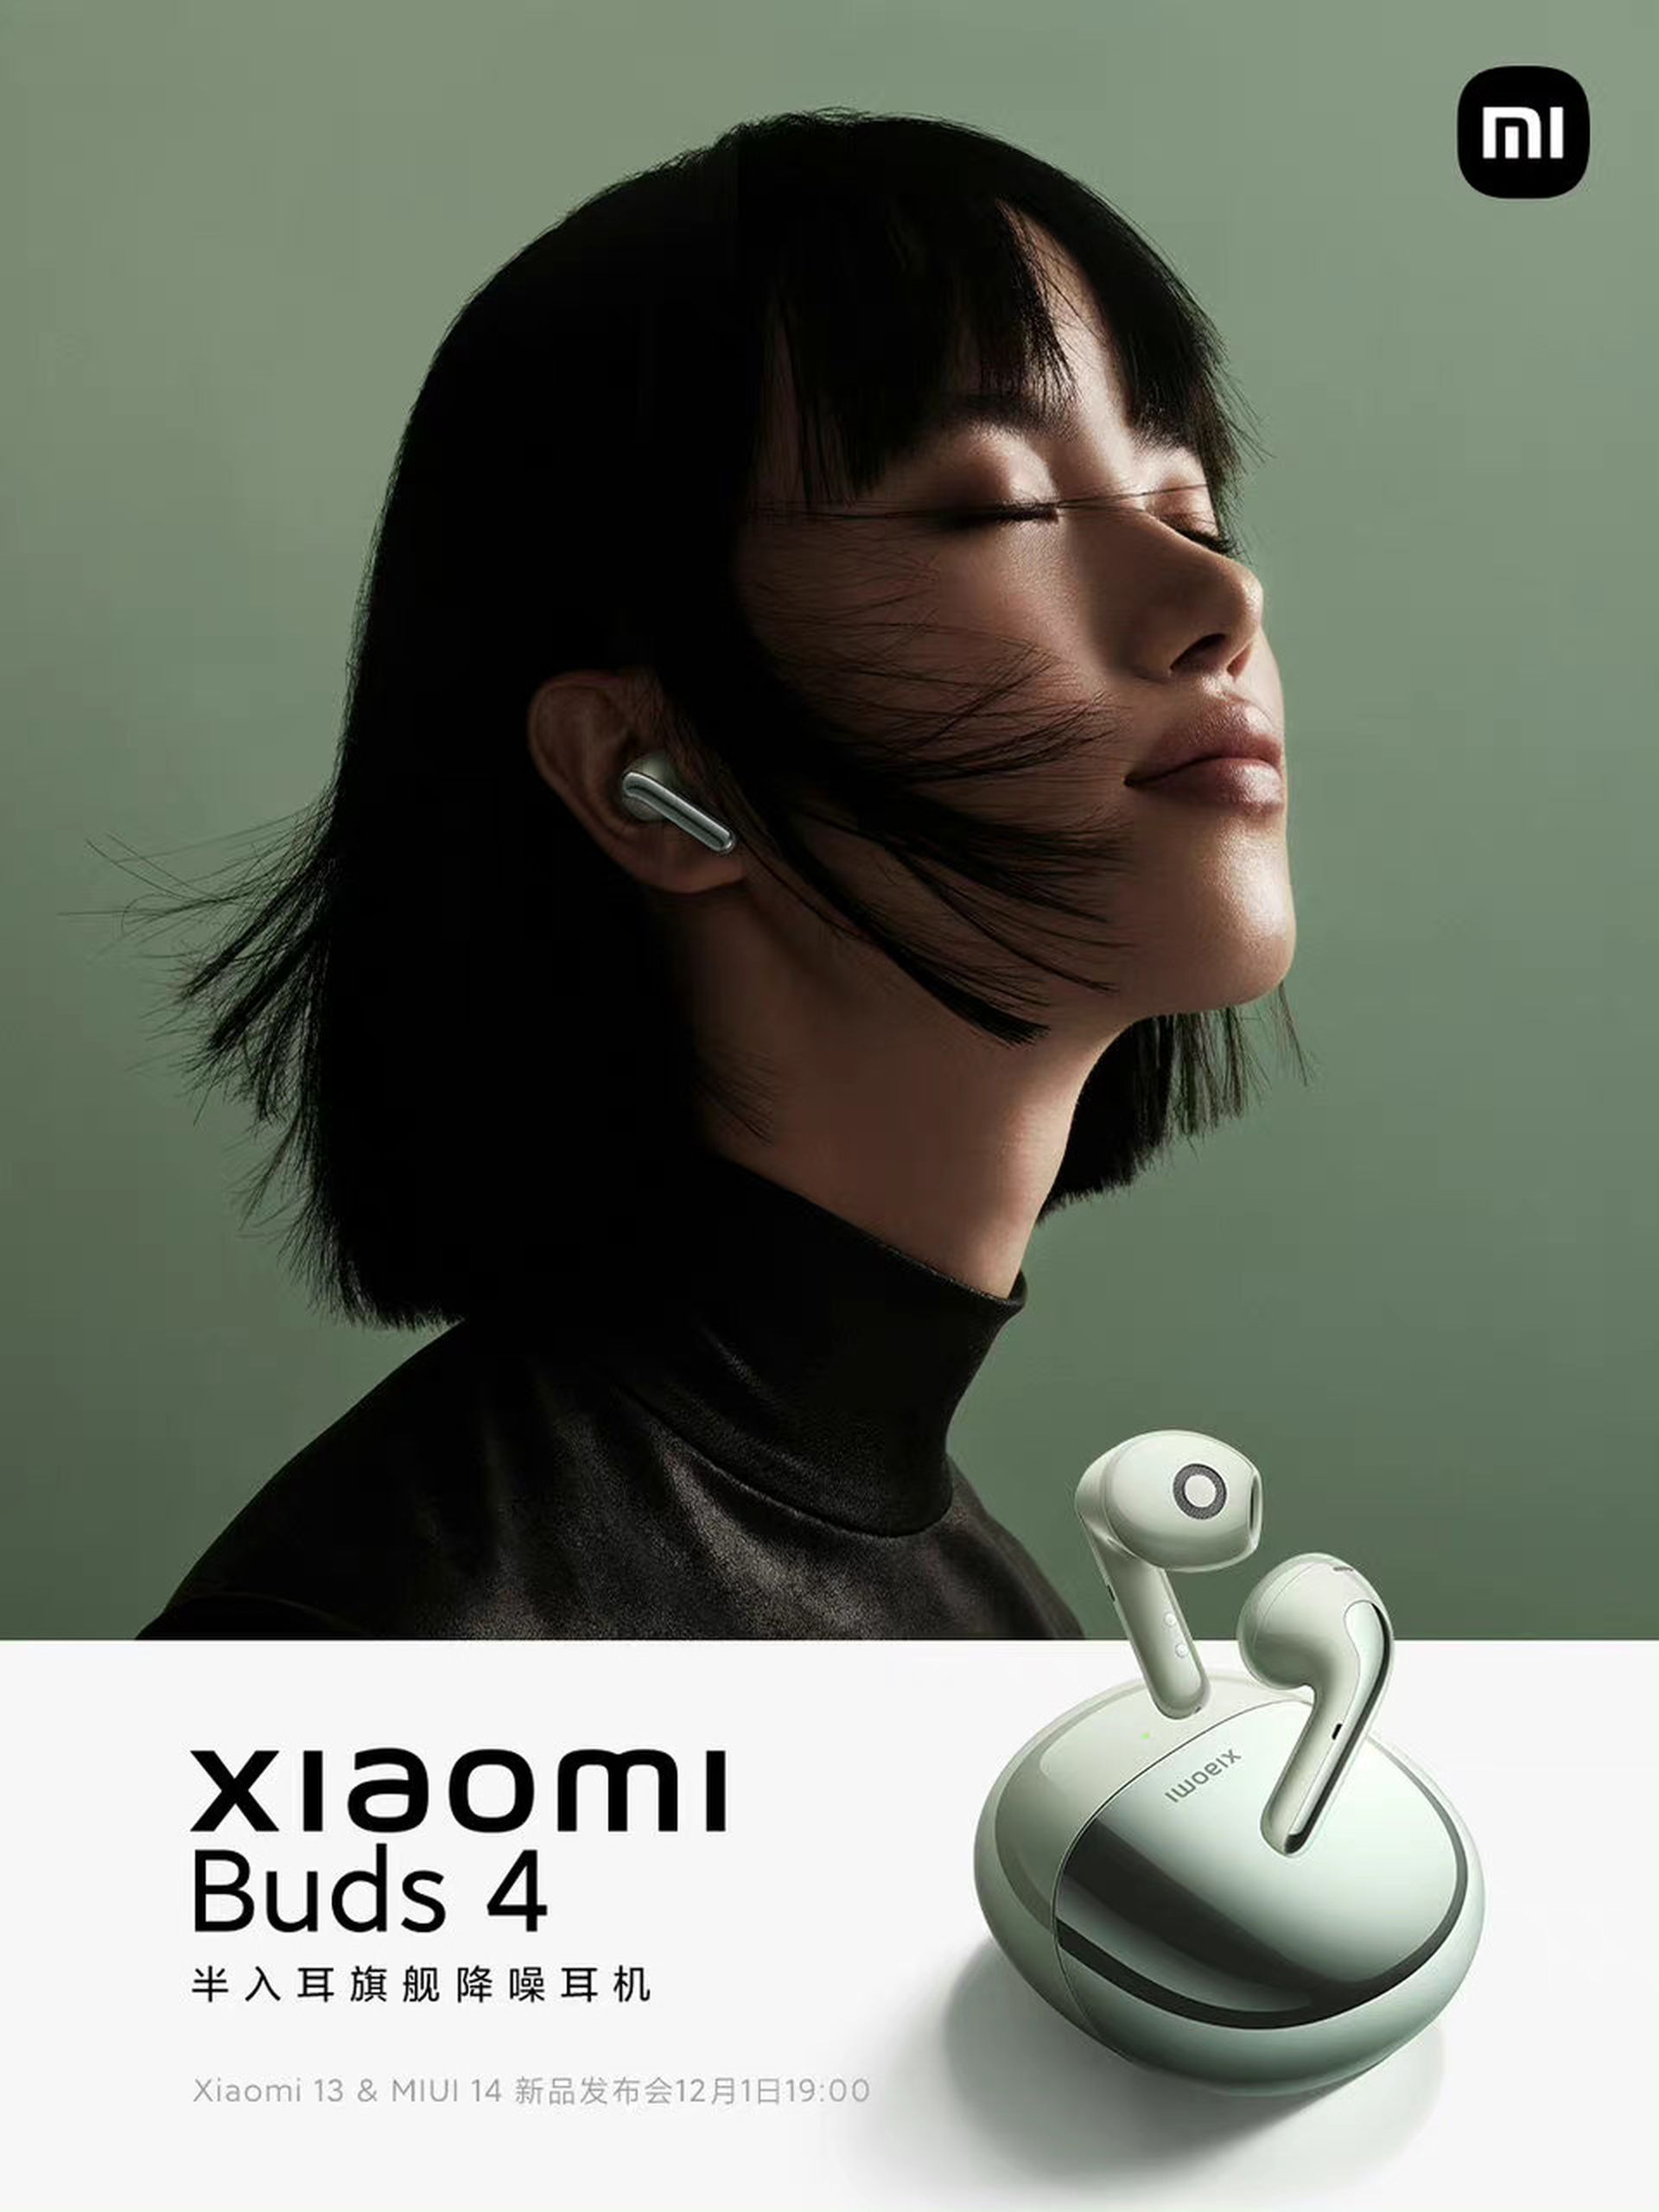 Xiaomi Buds 4 will be internationally released on December 1